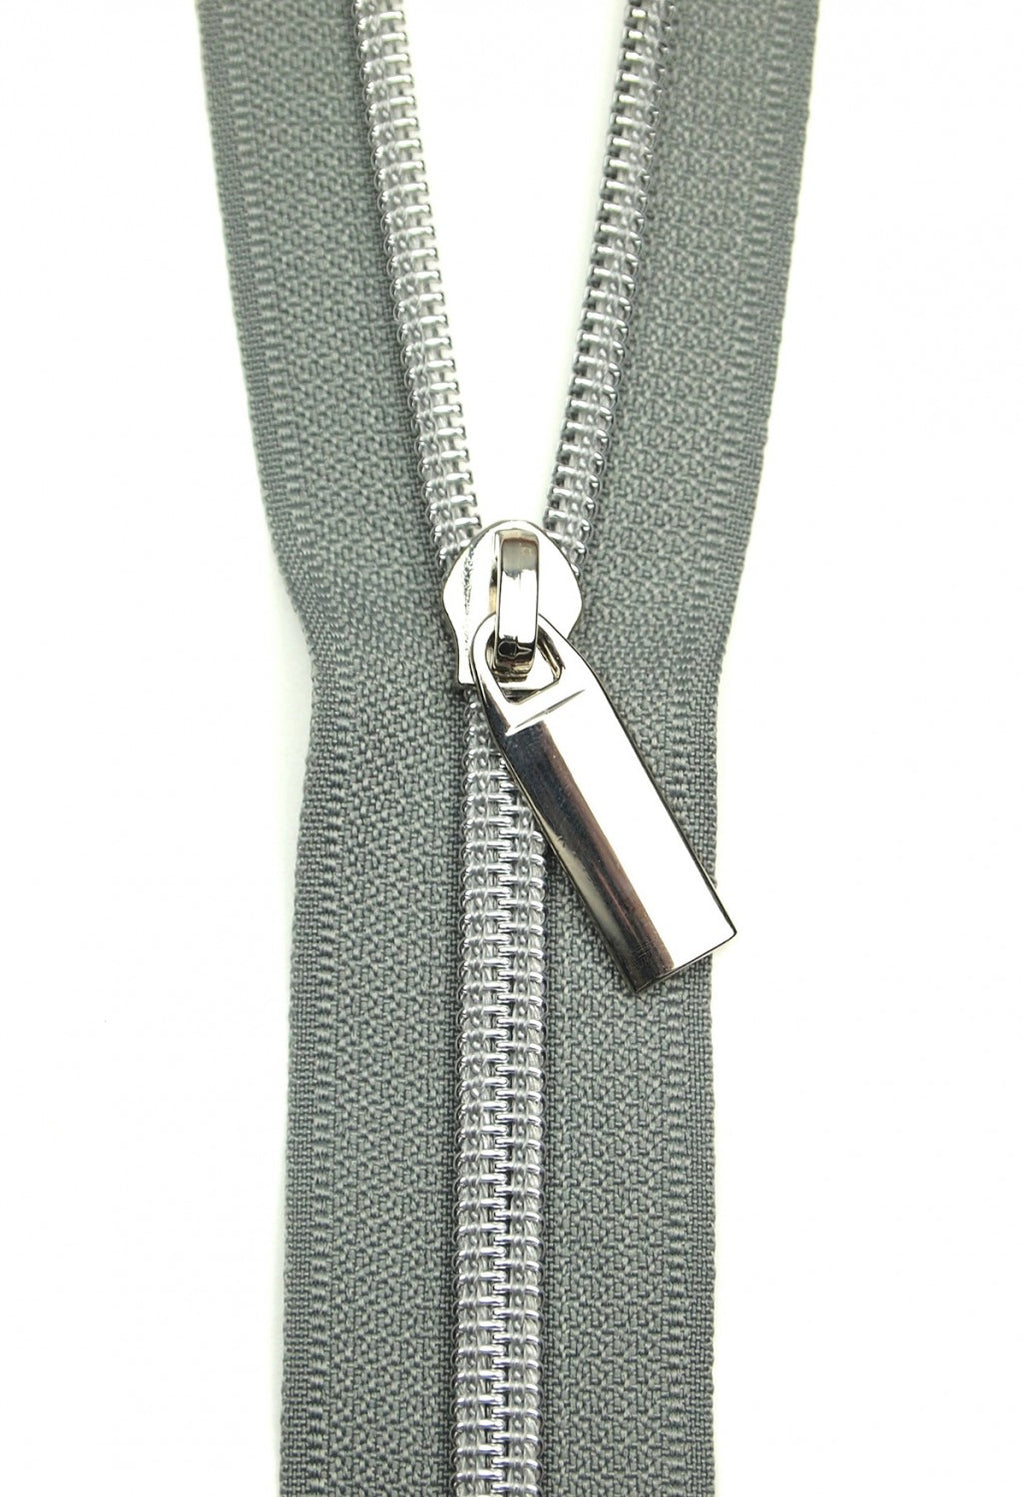 Size 5 Metallic Silver Zipper by the Yard With Silver Coil 3 Yards & 9  Regular donut Zipper Pulls 